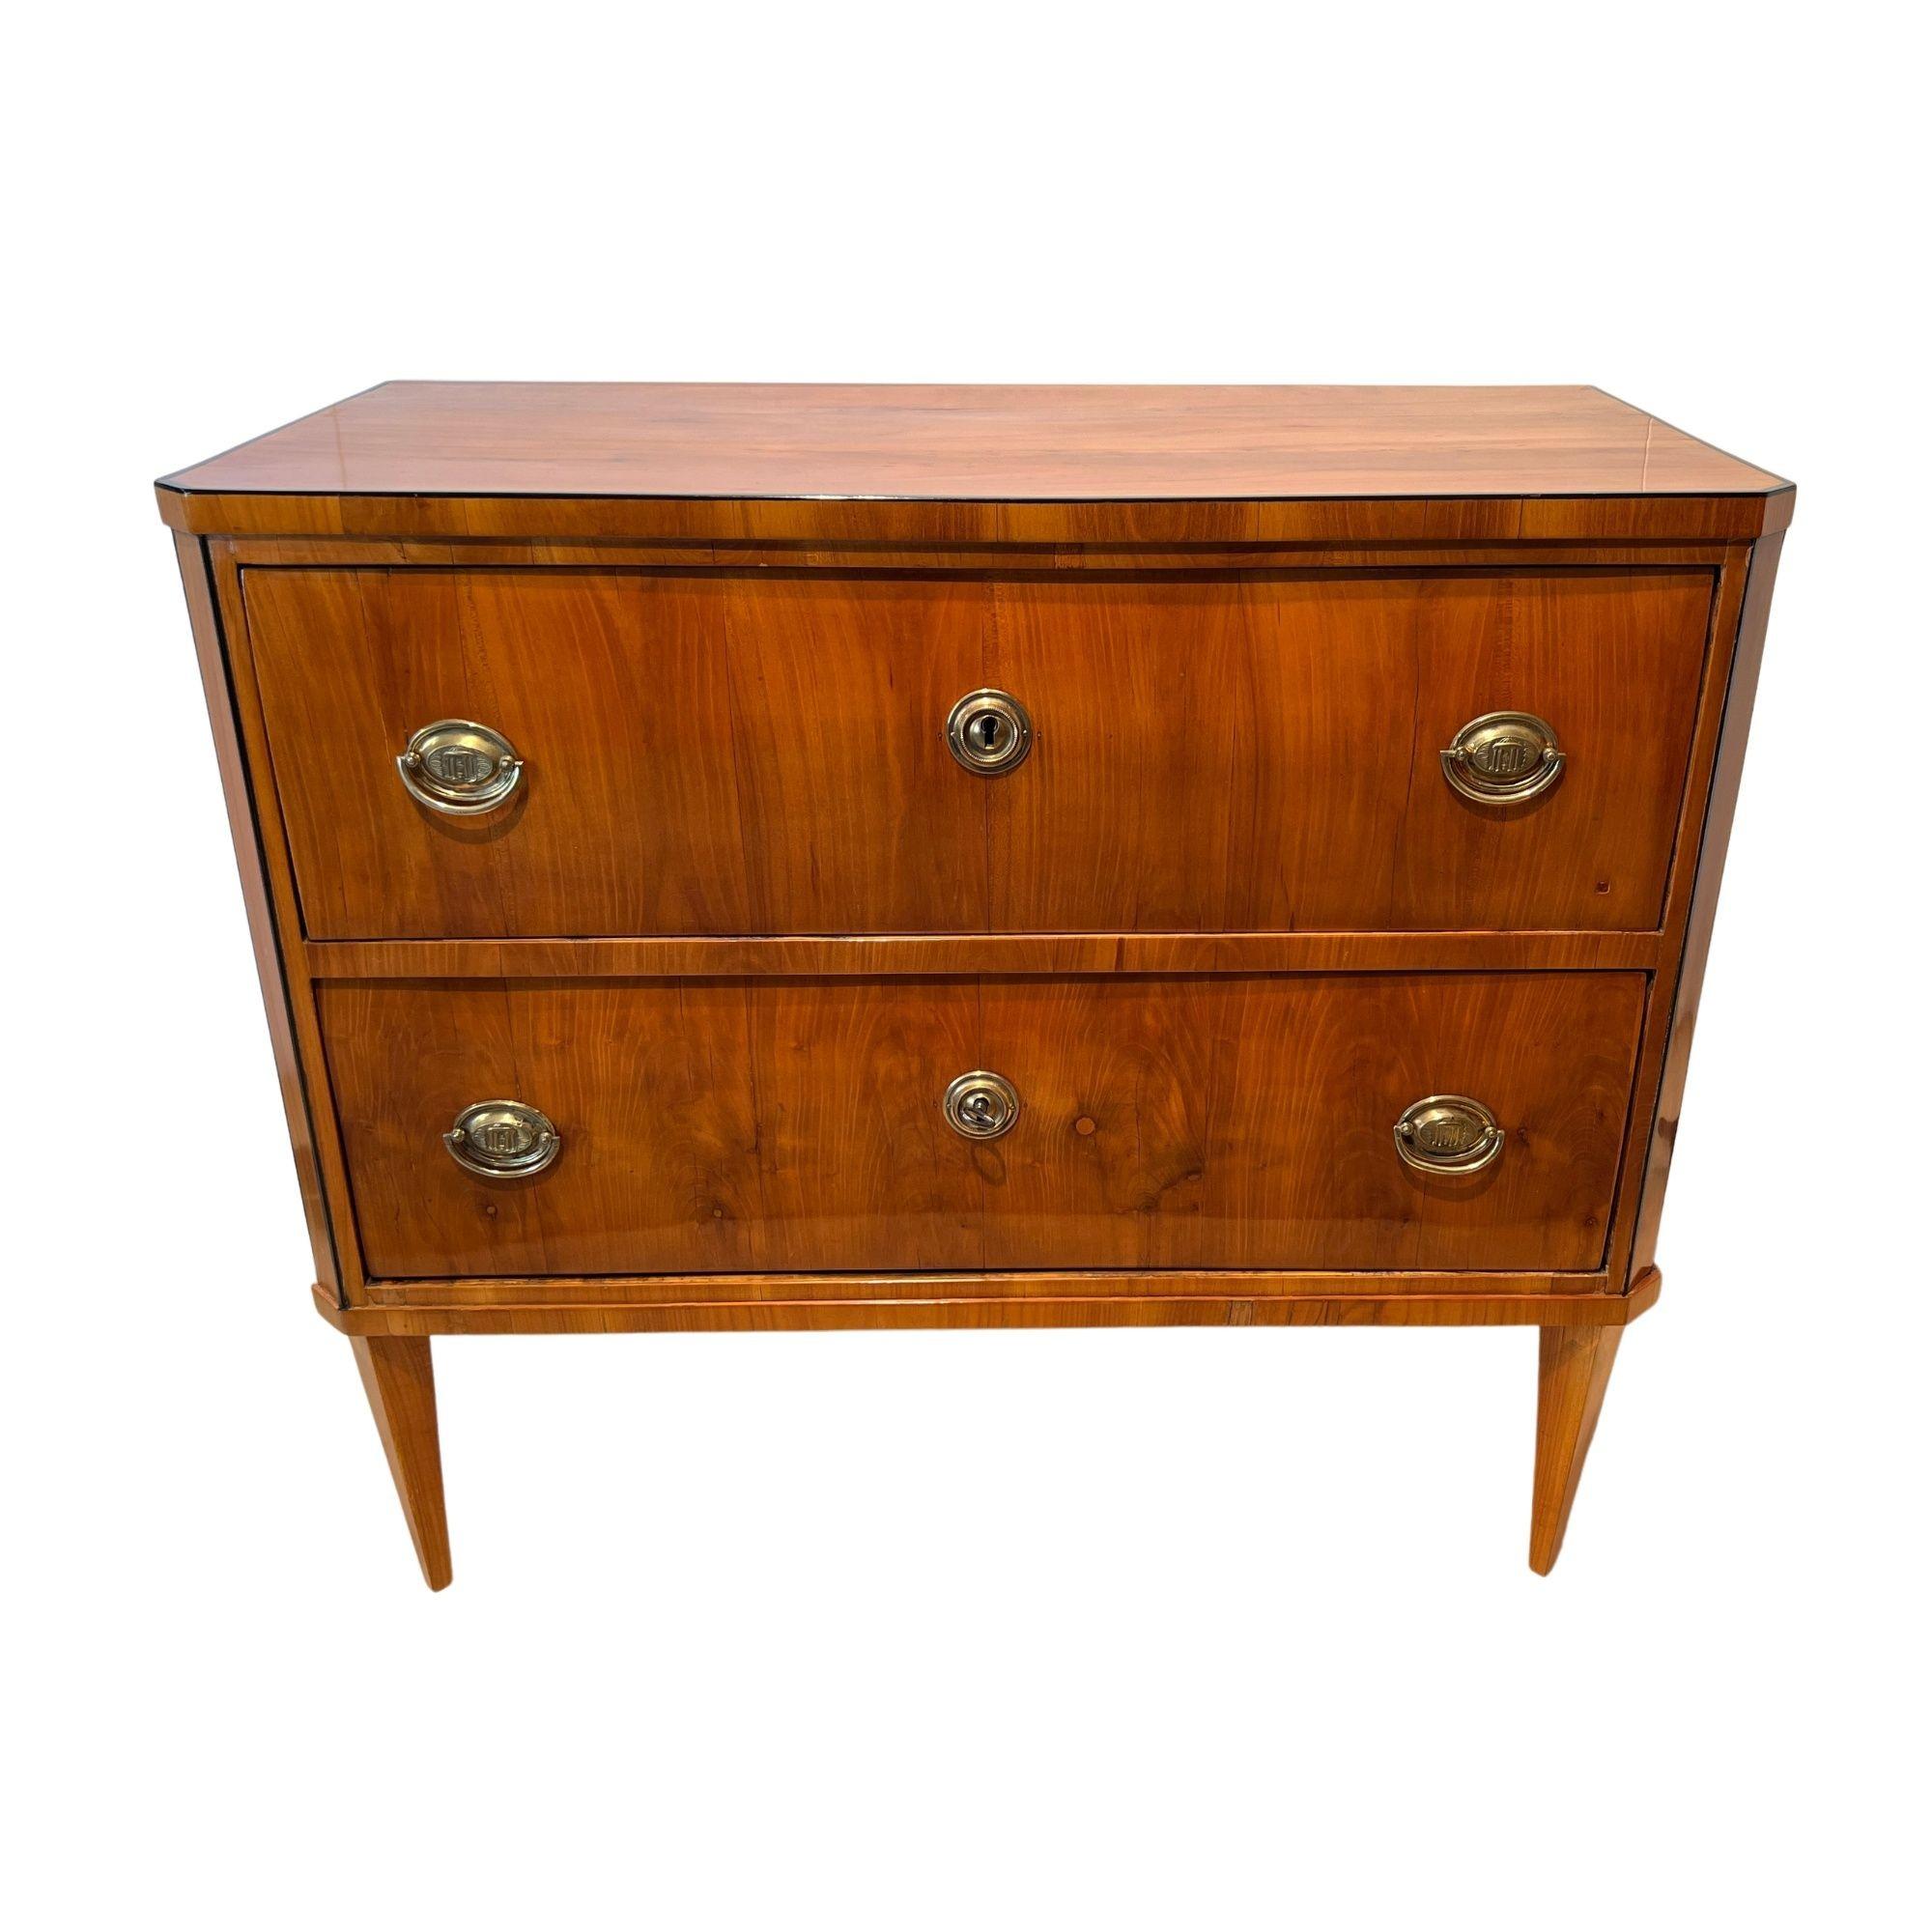 Fine, small Empire / early Biedermeier Commode or Chest of Two Drawers from South Germany around 1820.
Cherry veneered on softwood and solid cherry wood. Ebonized decorative trims. Original brass fittings and iron locks.
Restored condition, hand